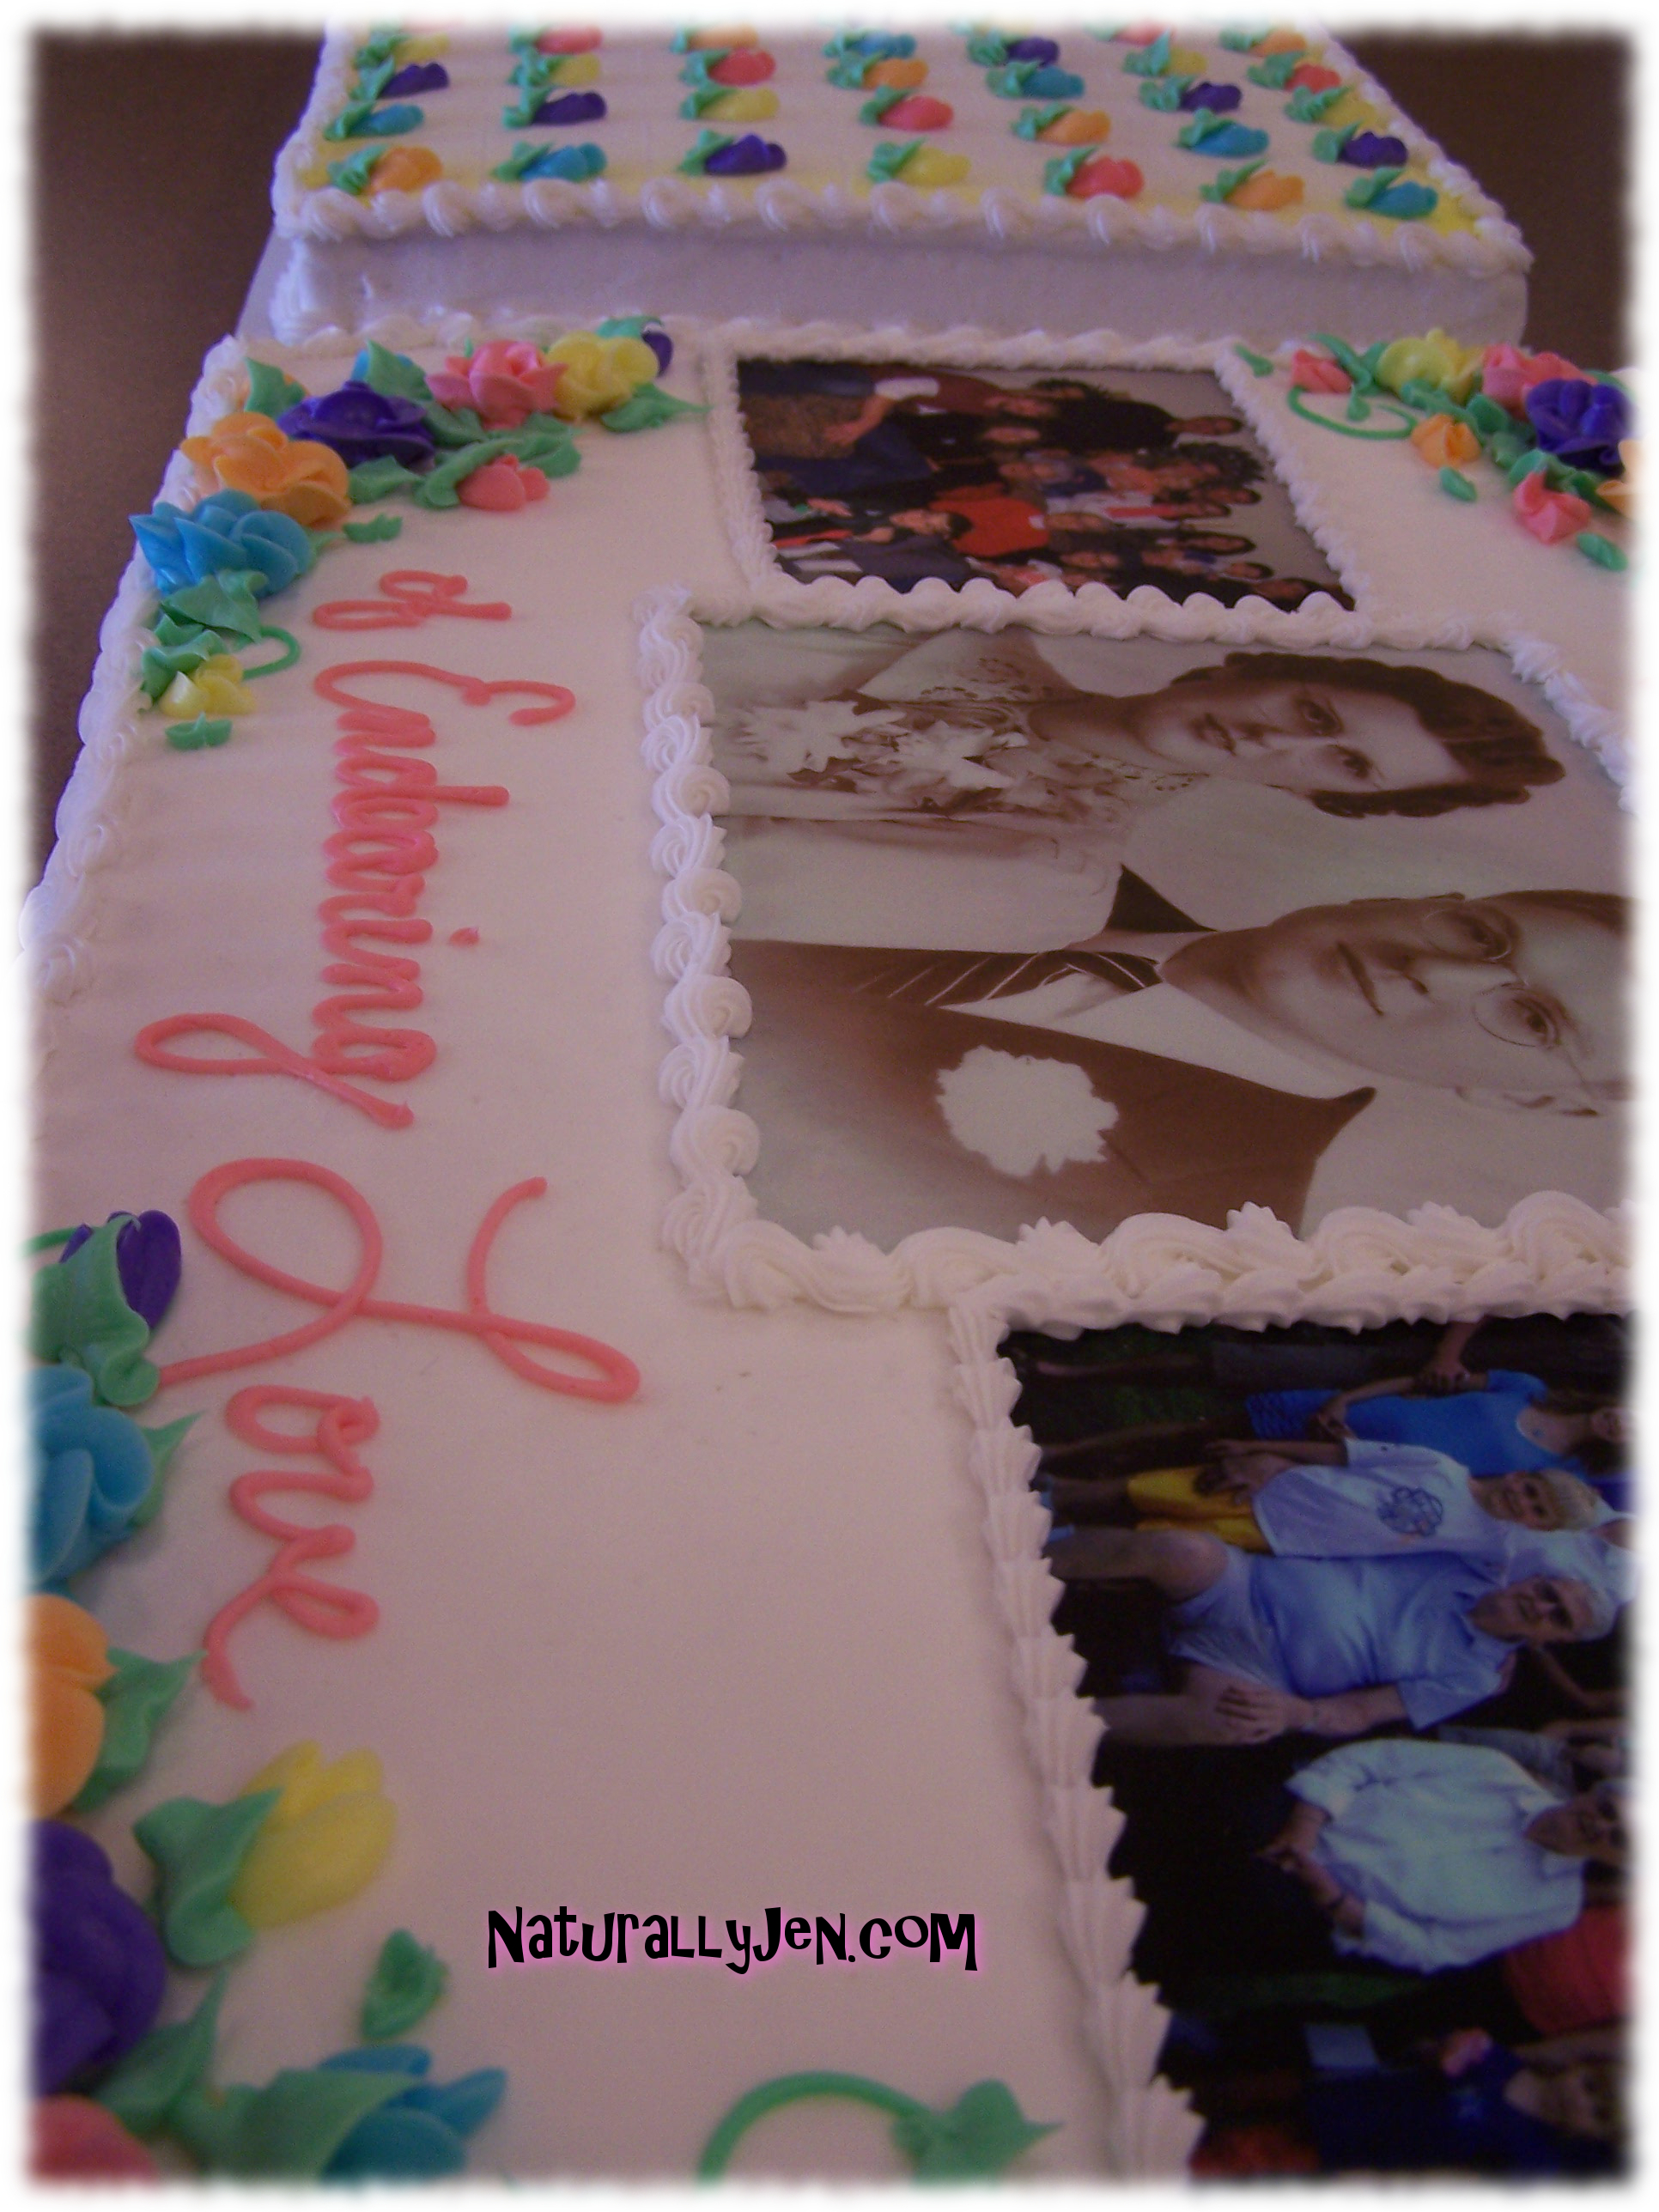 Edible Printed Photographs for Cakes by Naturally Jen